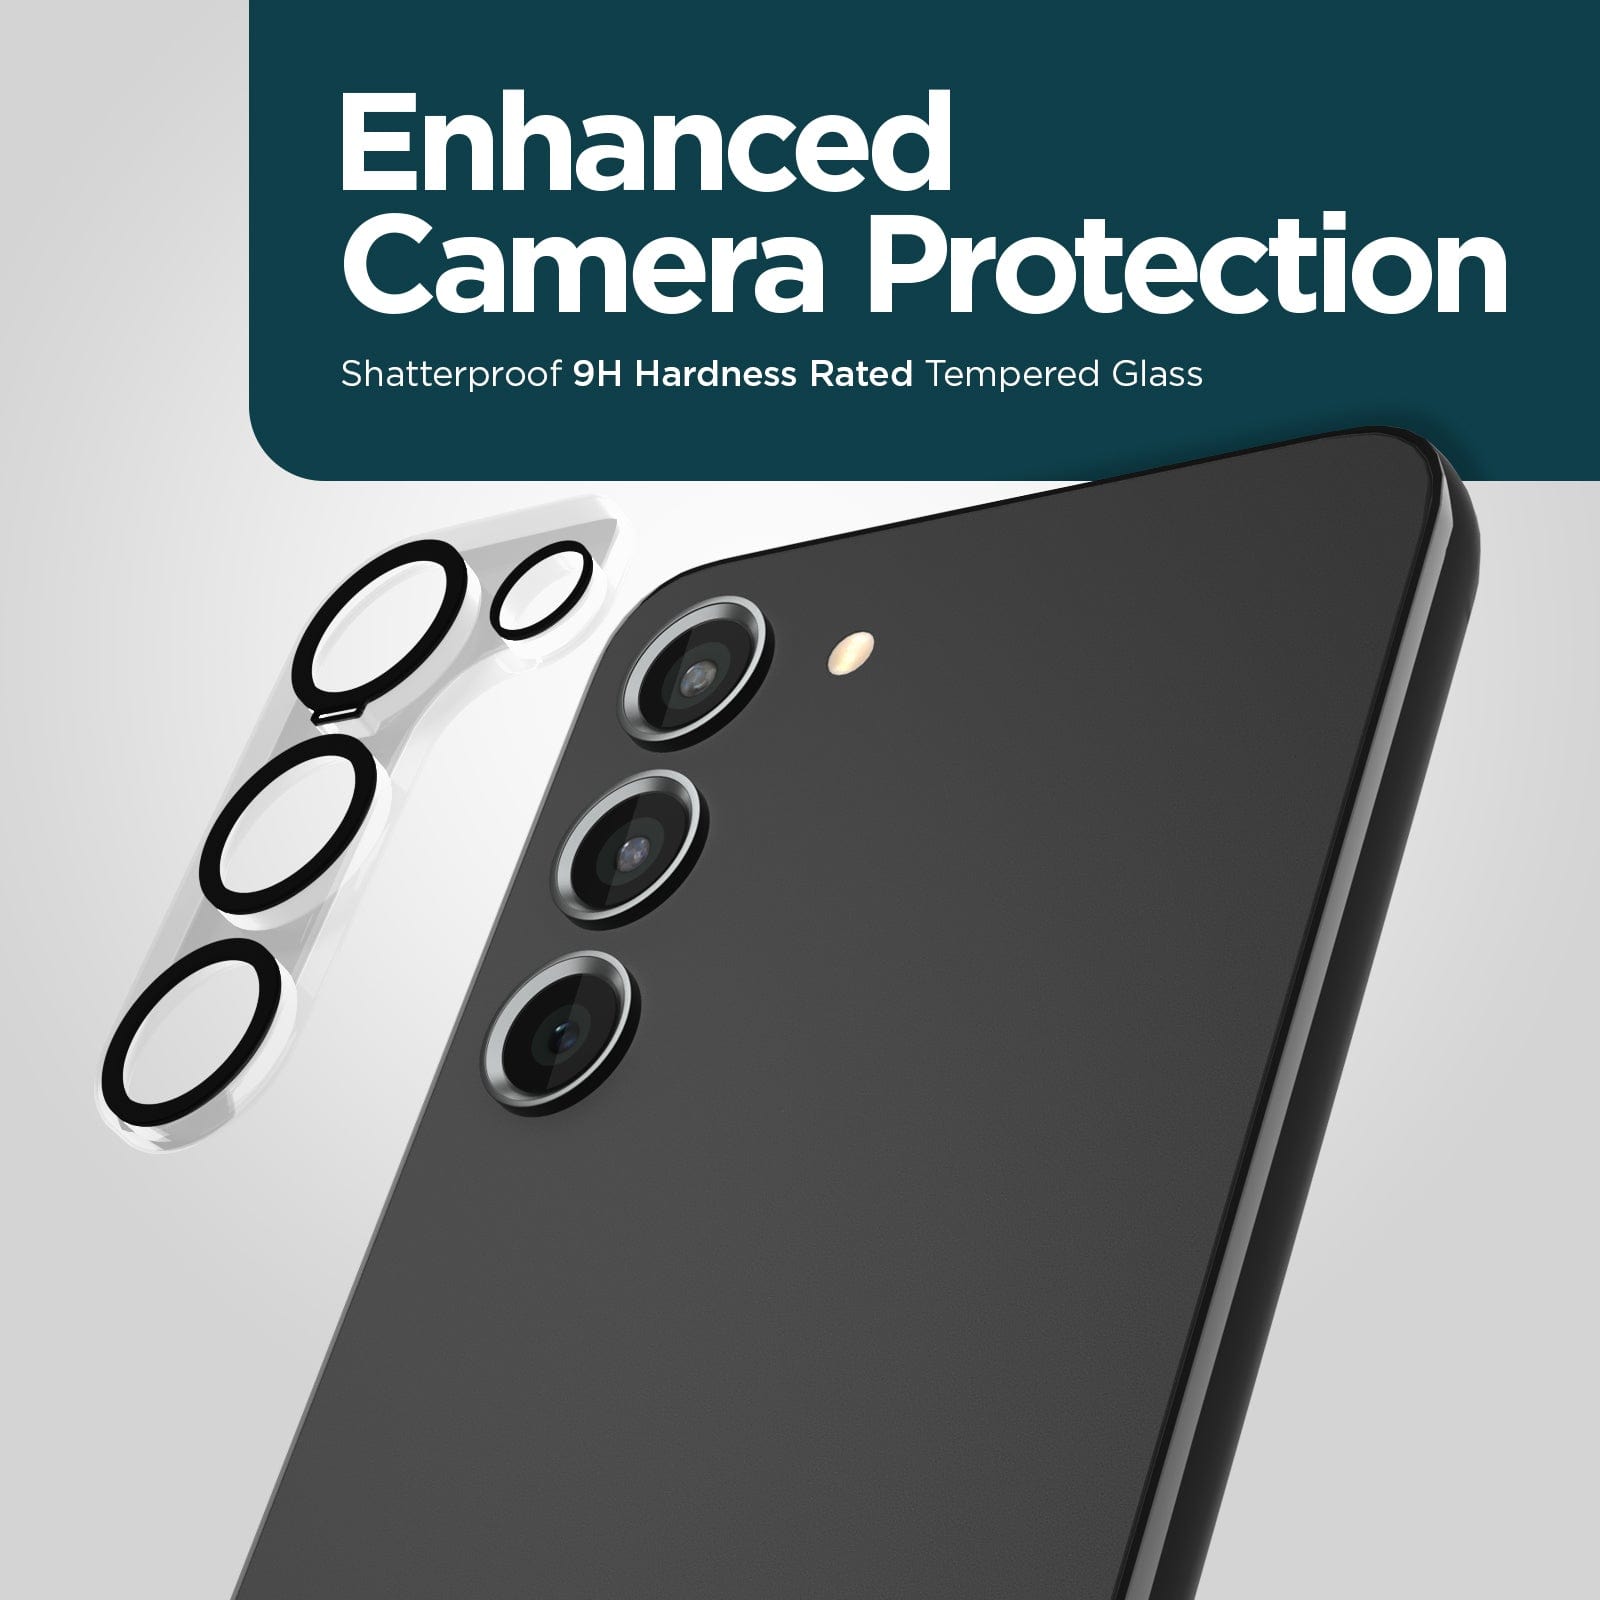 ENHANCED CAMERA PROTECTION. SHATTERPROOF 9H HARDNESS RATED TEMPERED GLASS. 